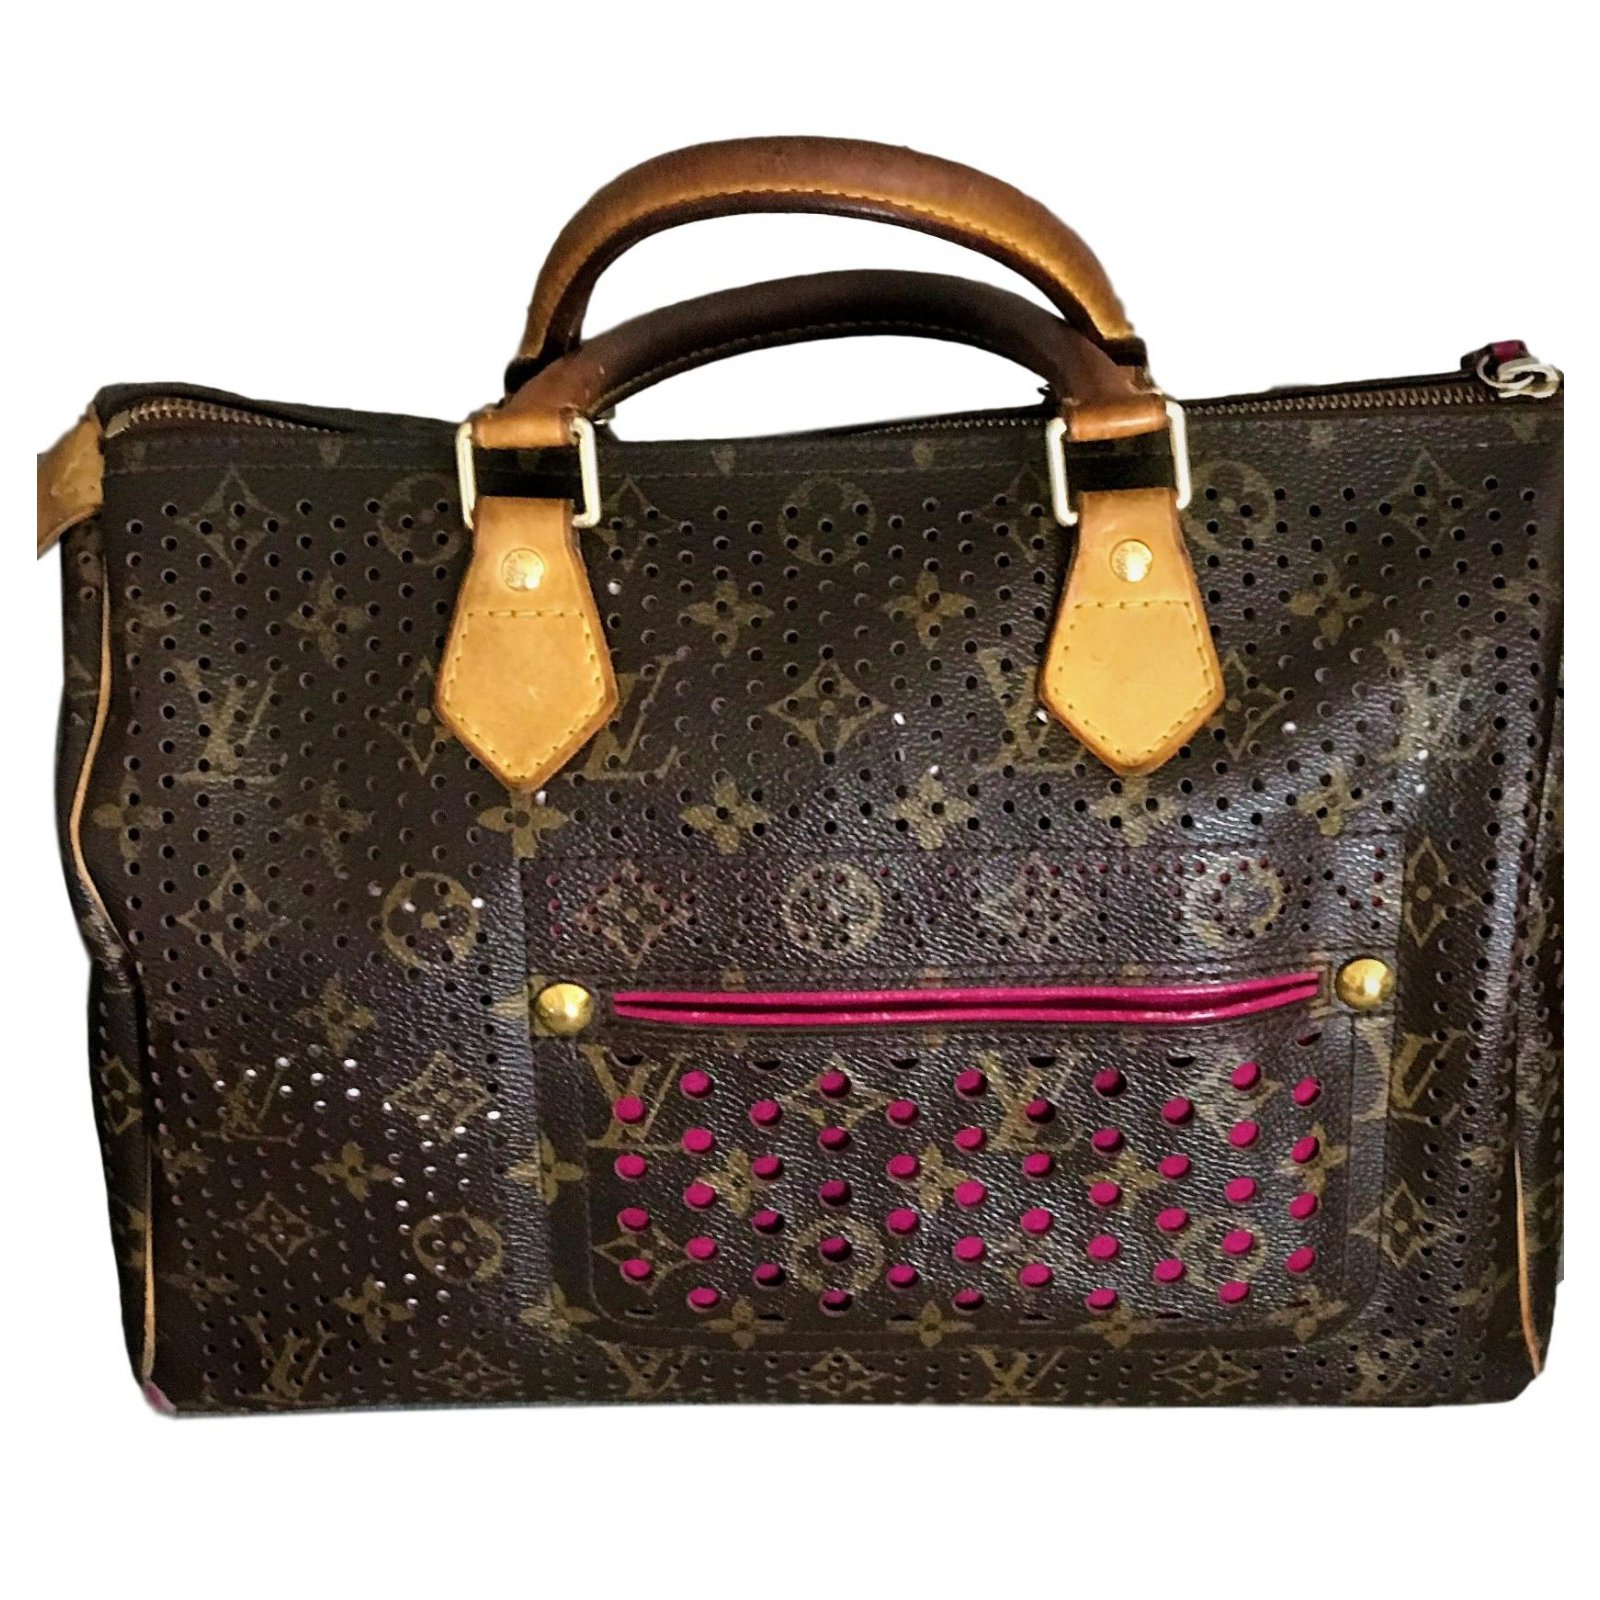 Louis Vuitton Limited Edition Perforated Speedy 30